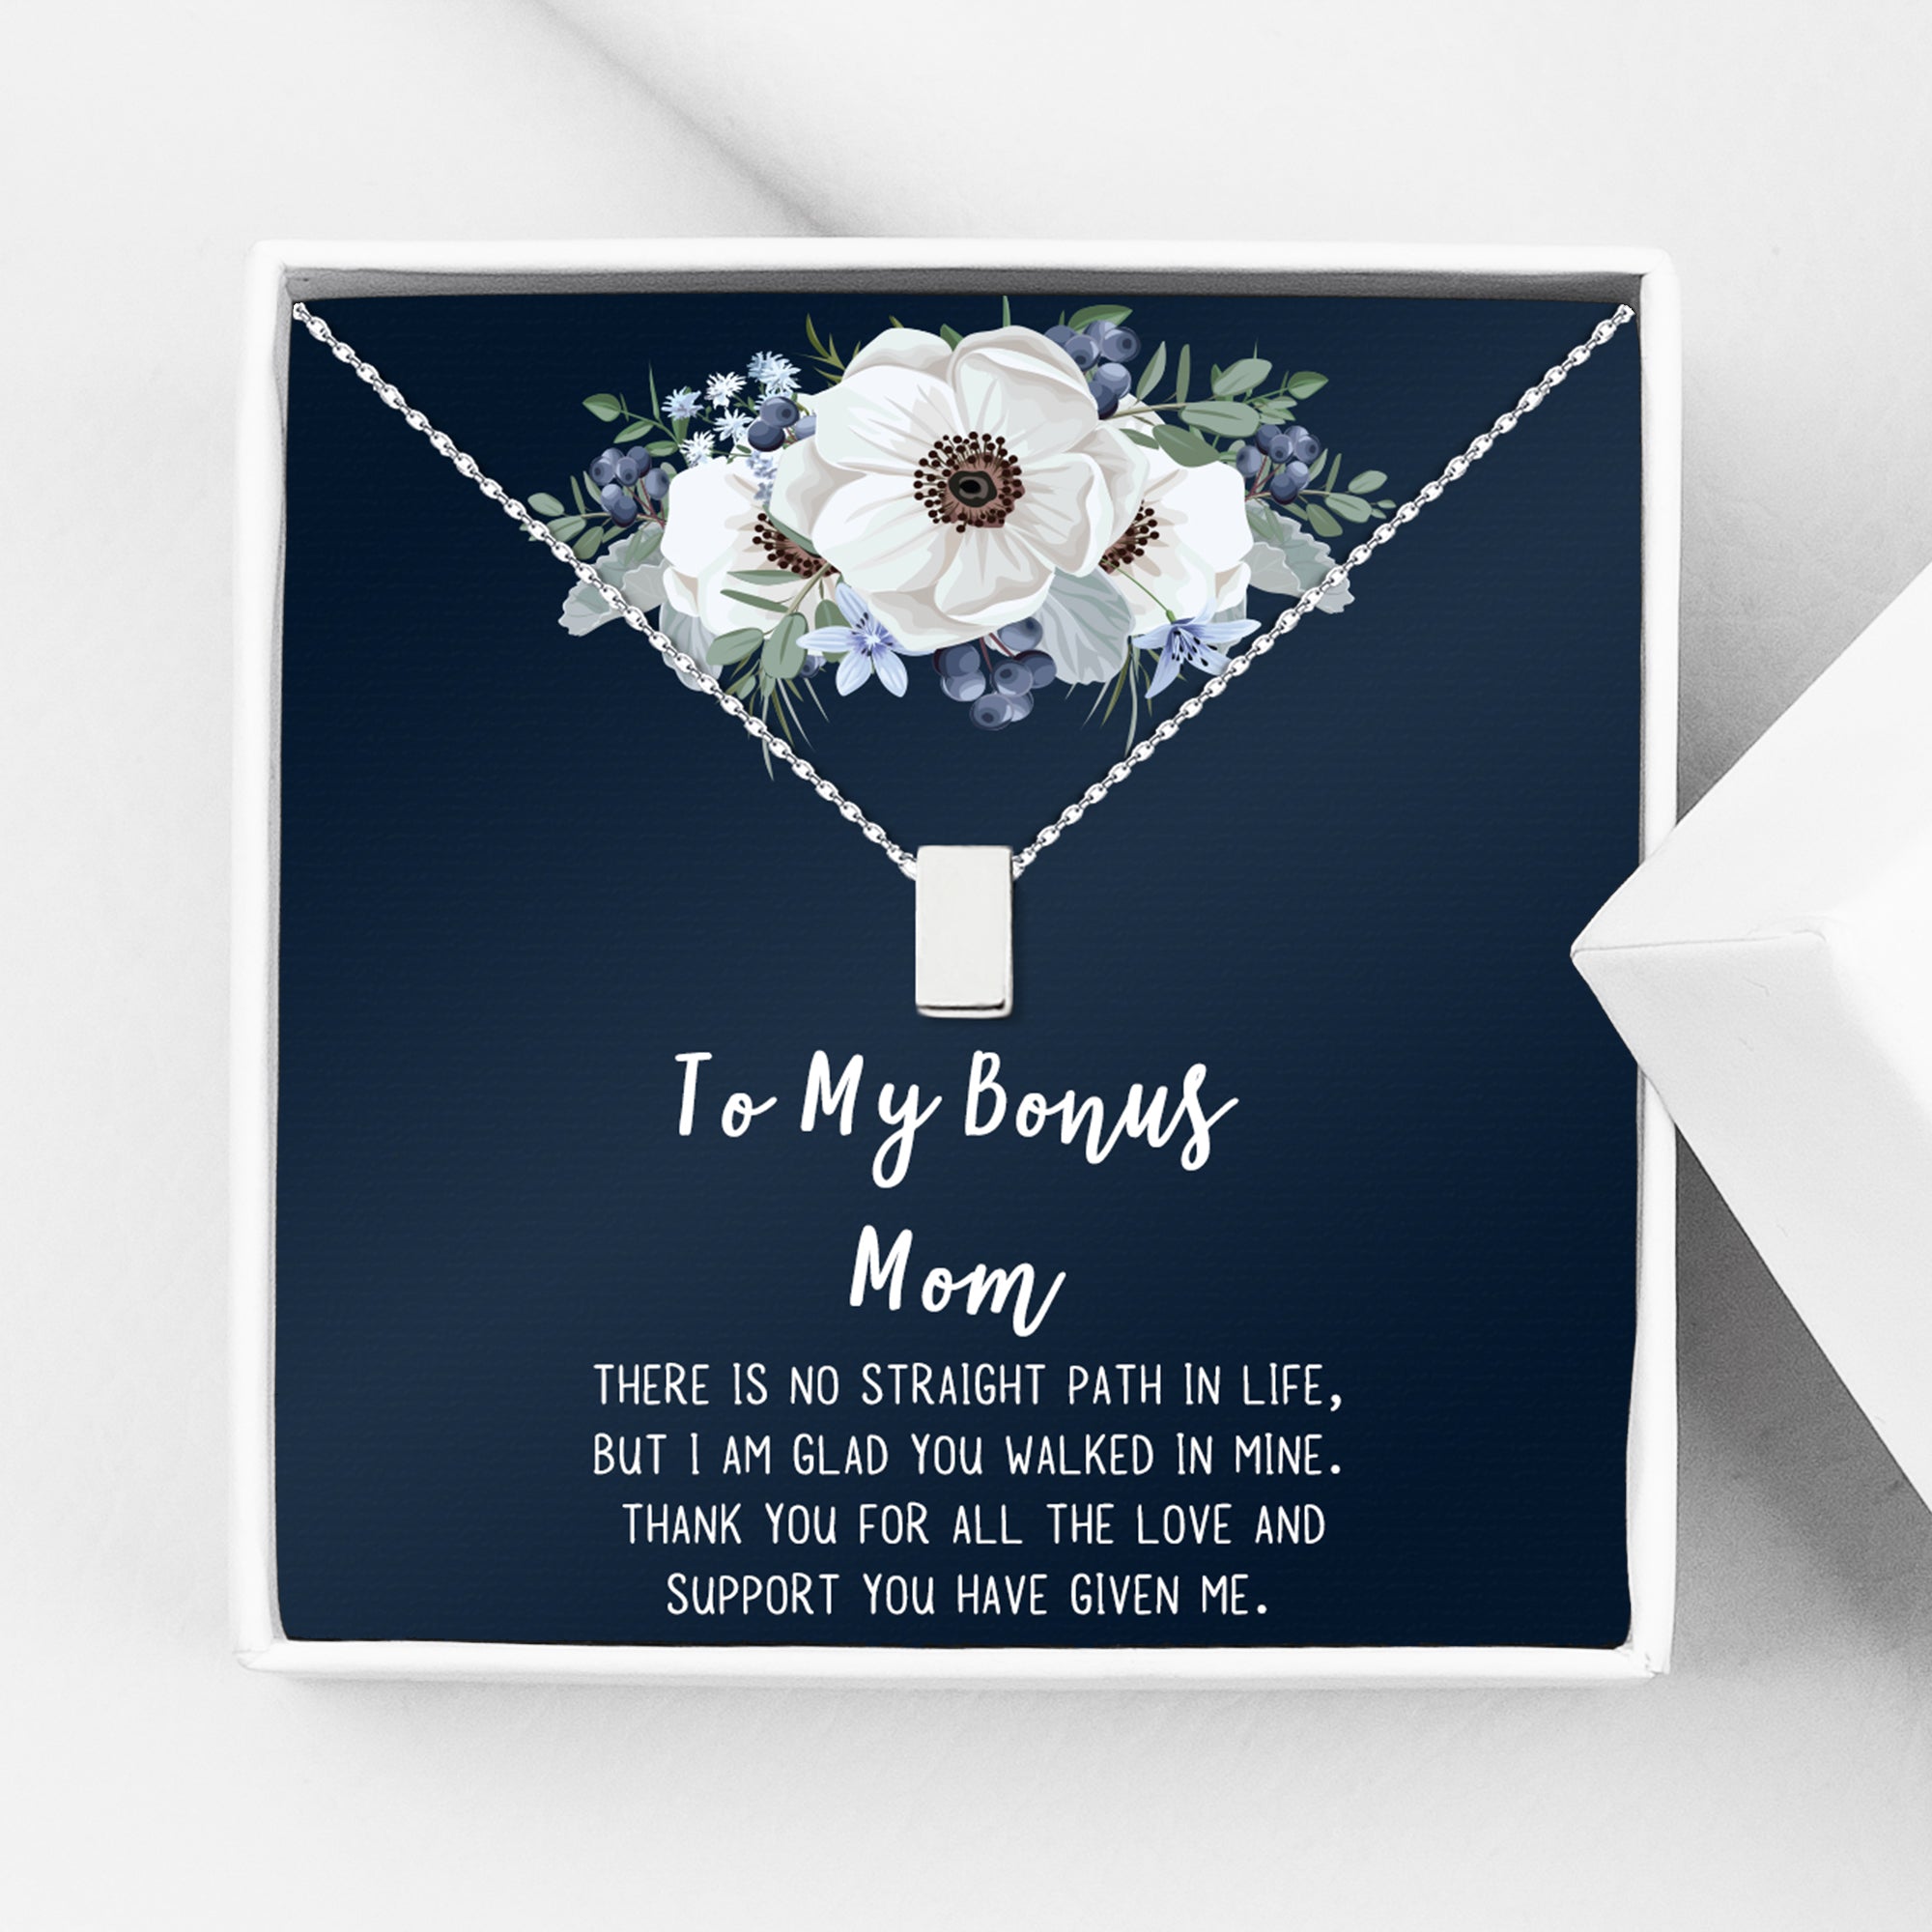 Anavia Thank You Necklace, Thank You Cards, Thank You Gift Box